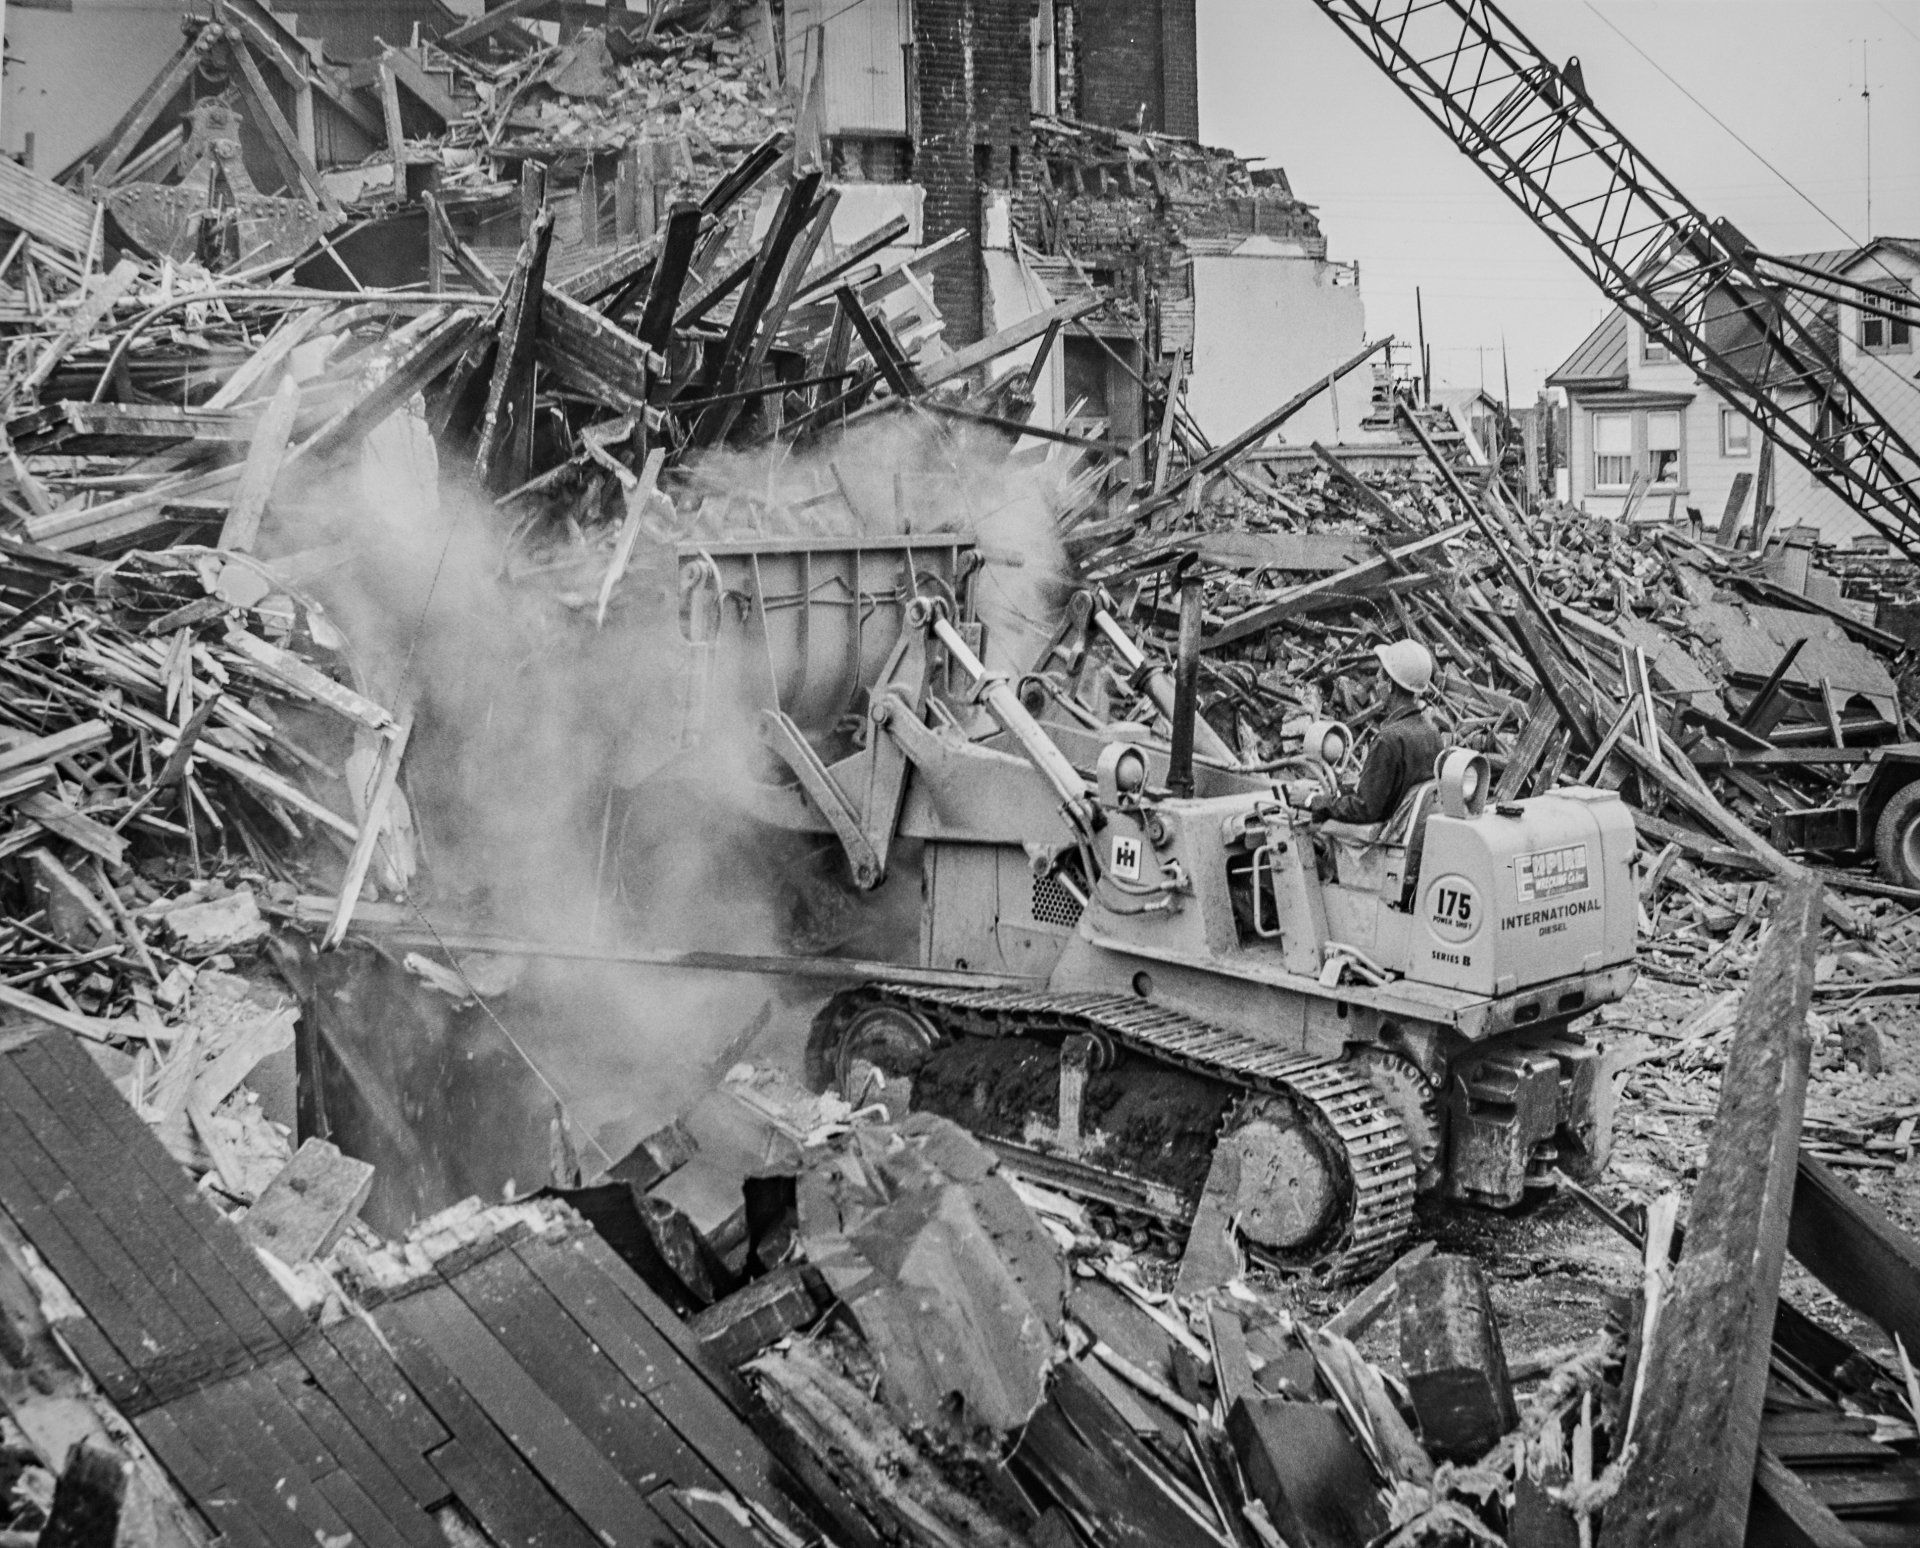 A black and white photo of a bulldozer demolishing a building